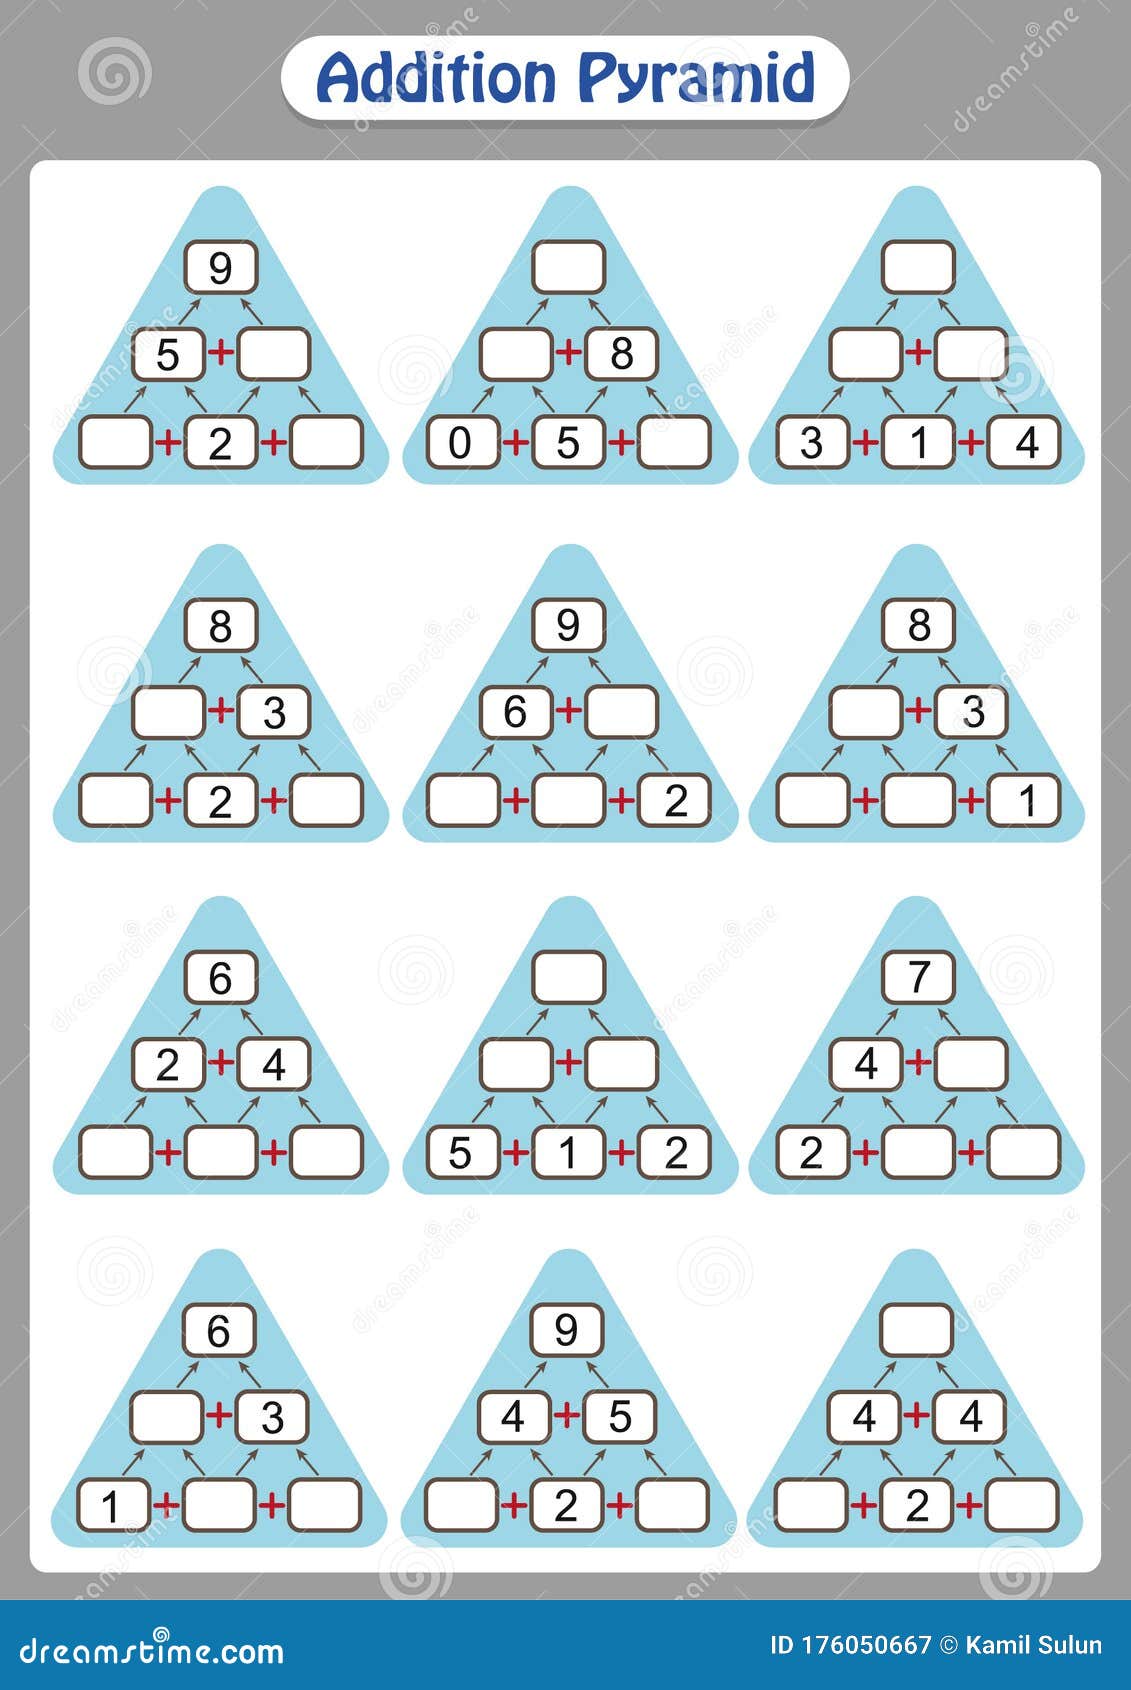 maths-pyramids-complete-the-missing-numbers-math-worksheet-for-kids-stock-illustration